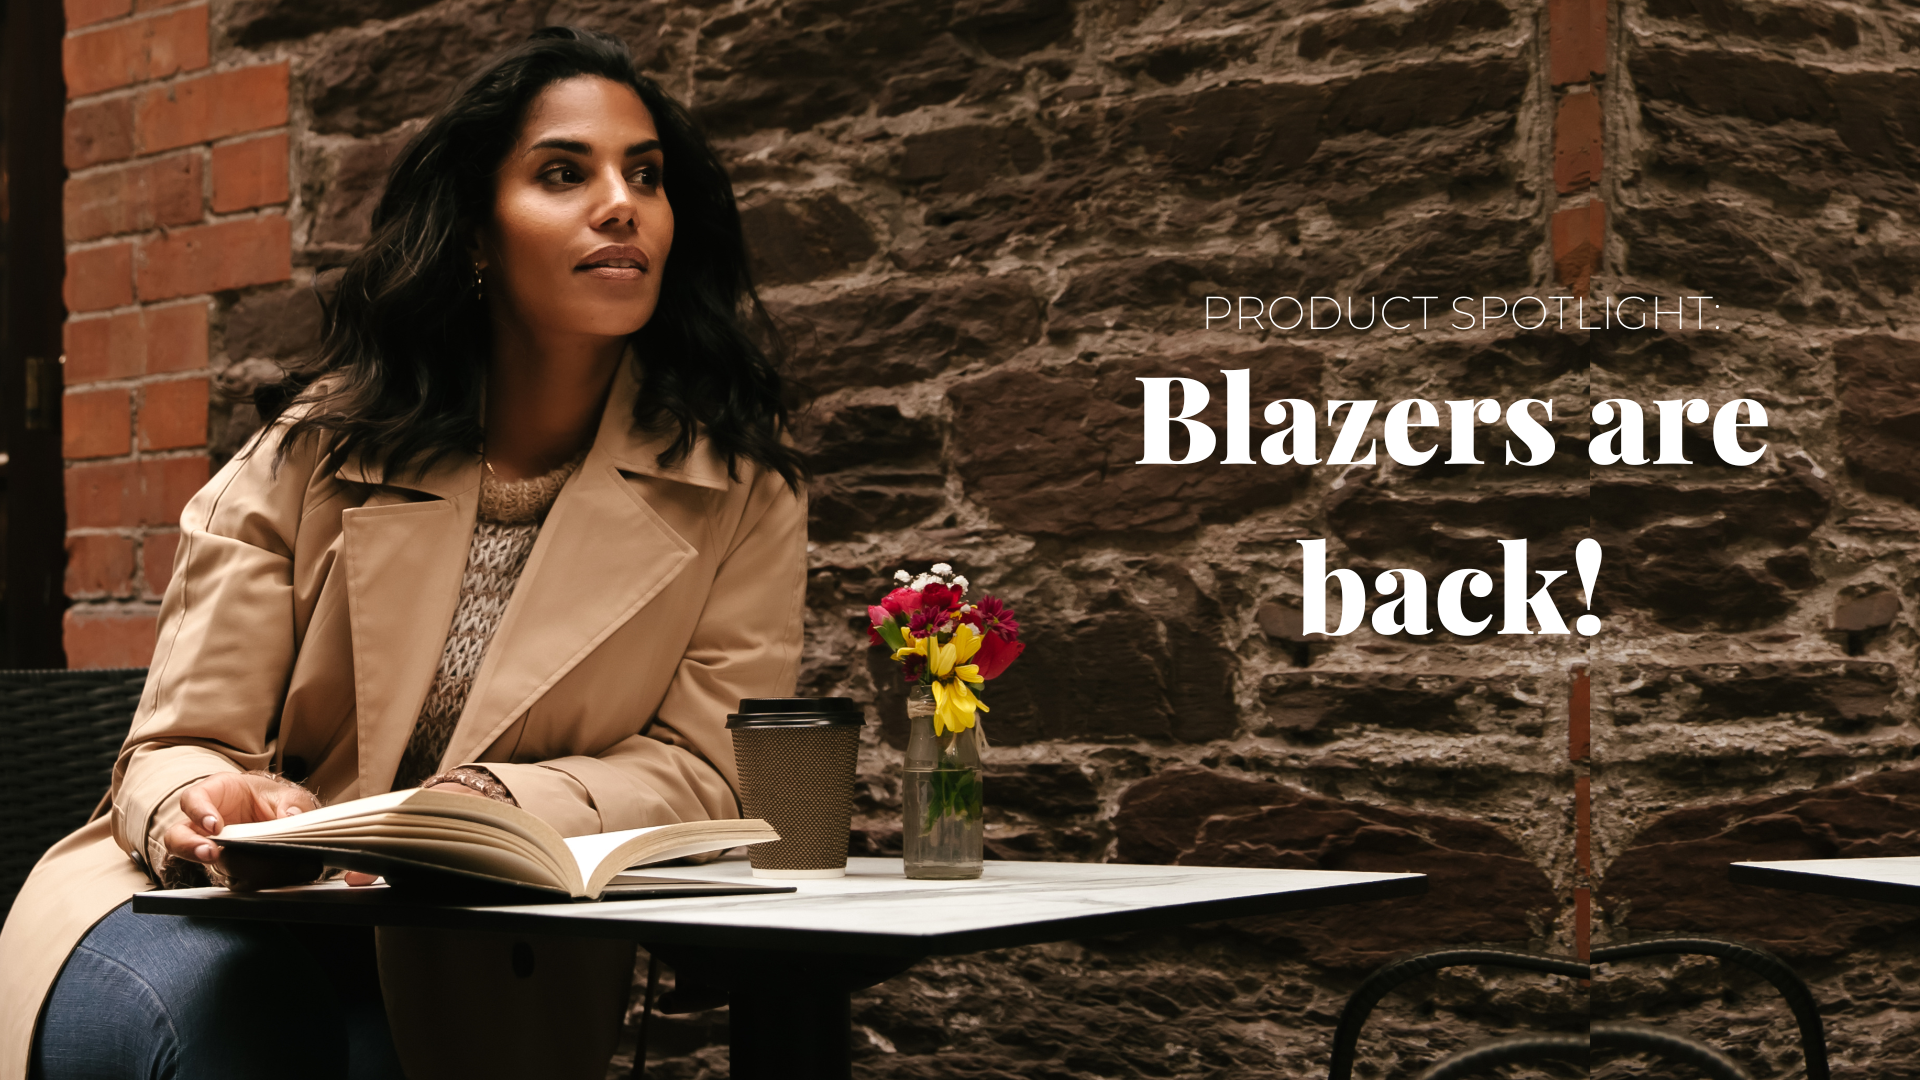 Virgo Boutique | Blazers are back and better than ever!